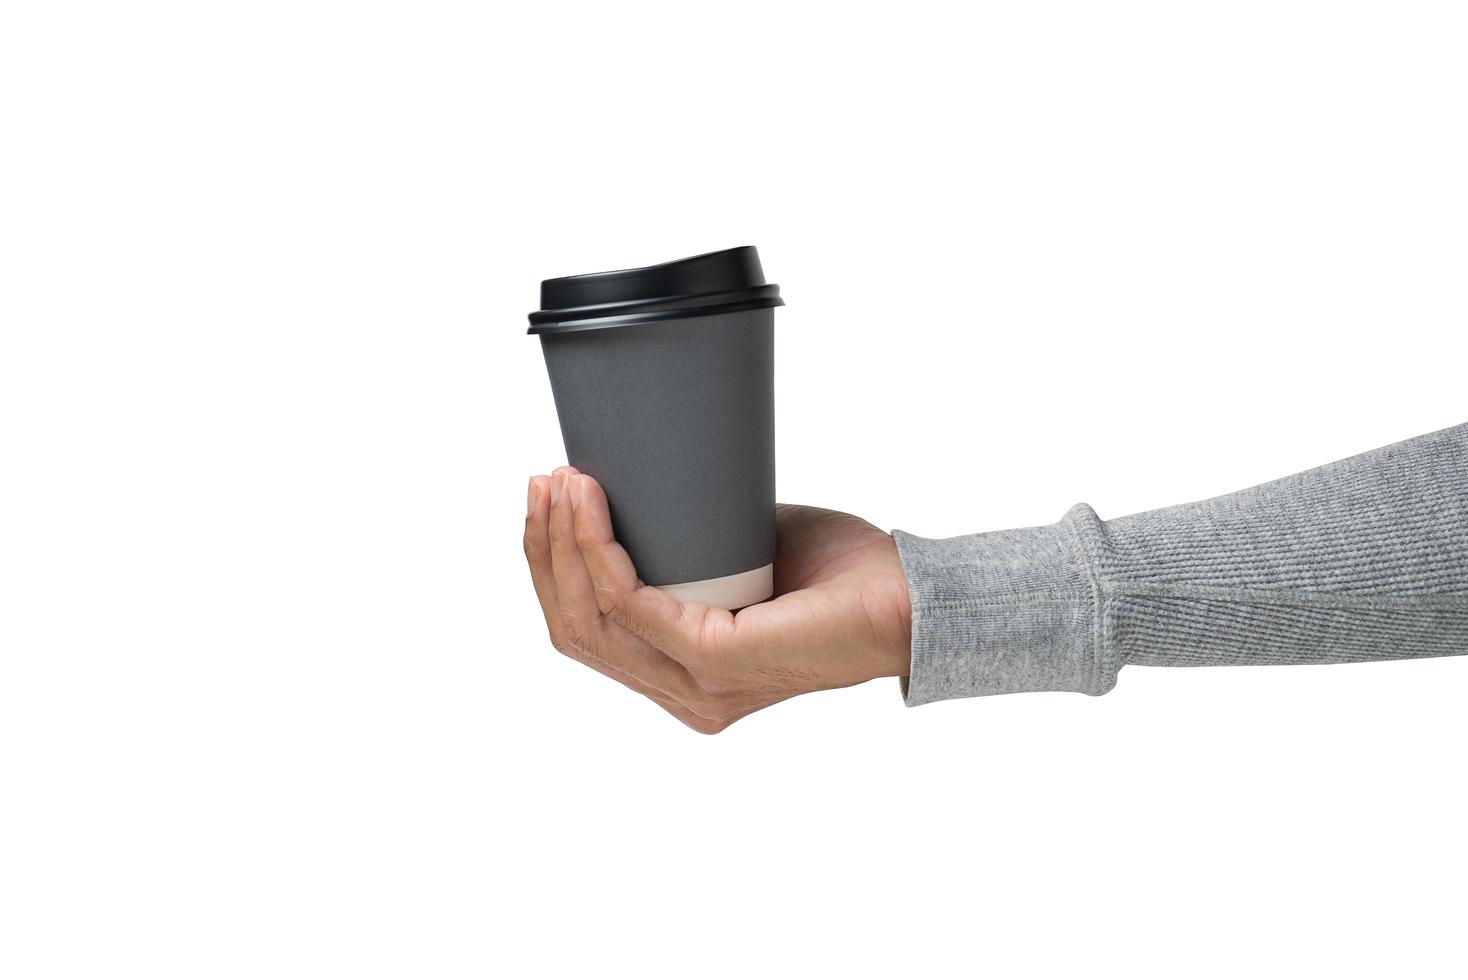 Hands holding a hot coffee cup on white background photo